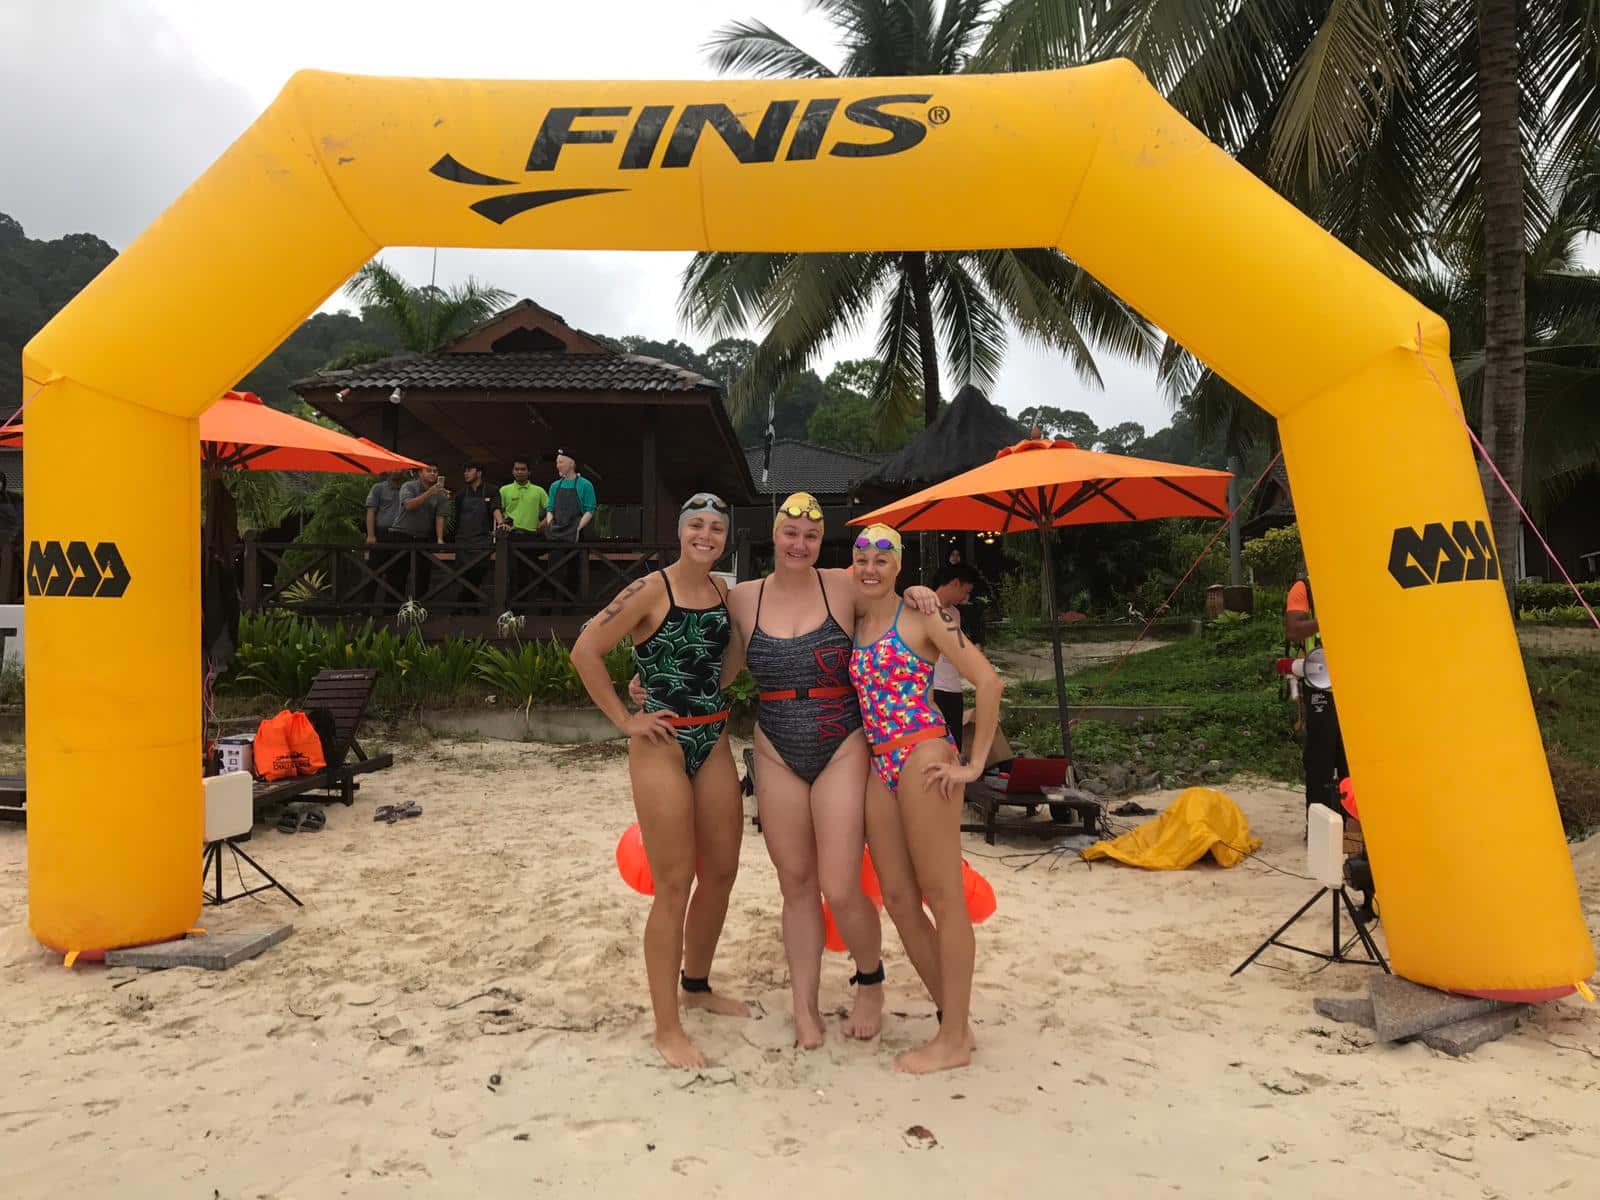 Abbie Fish with two team members standing by an inflatable Finis entrance arch.